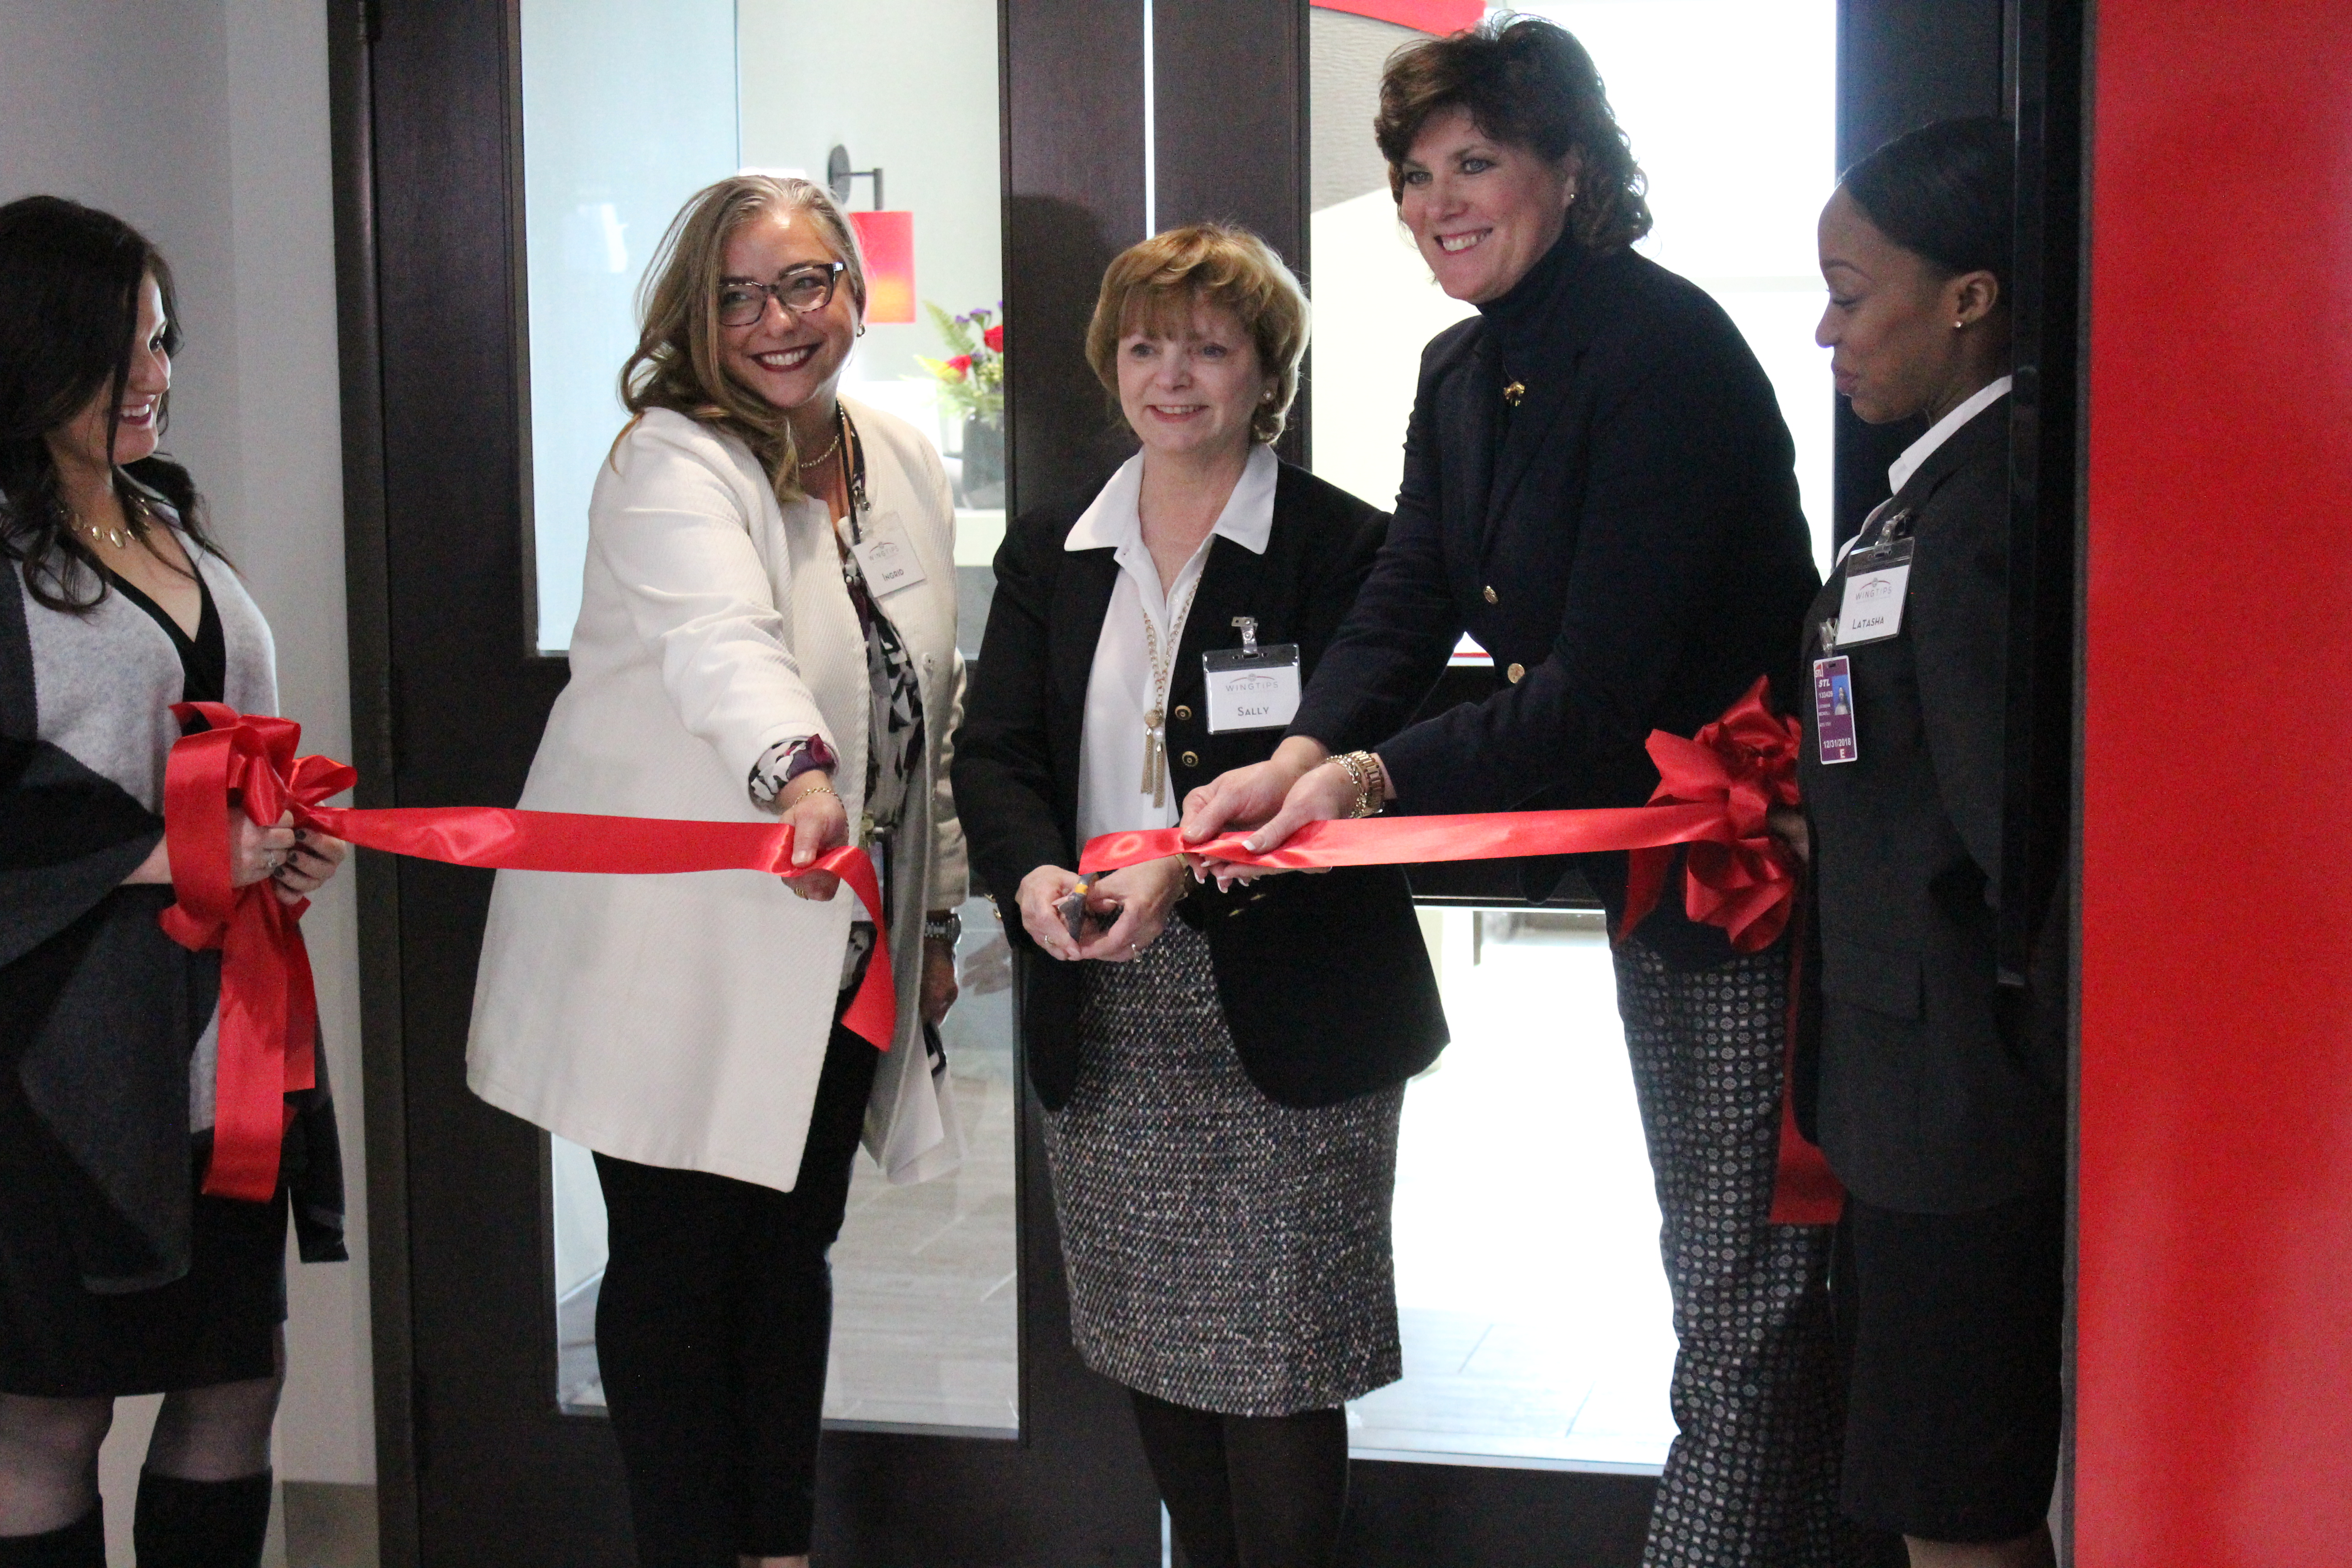 Airport Terminal Service Representatives and the St. Louis Airport Director Cut the Ribbon at The Wingtips Lounge STL